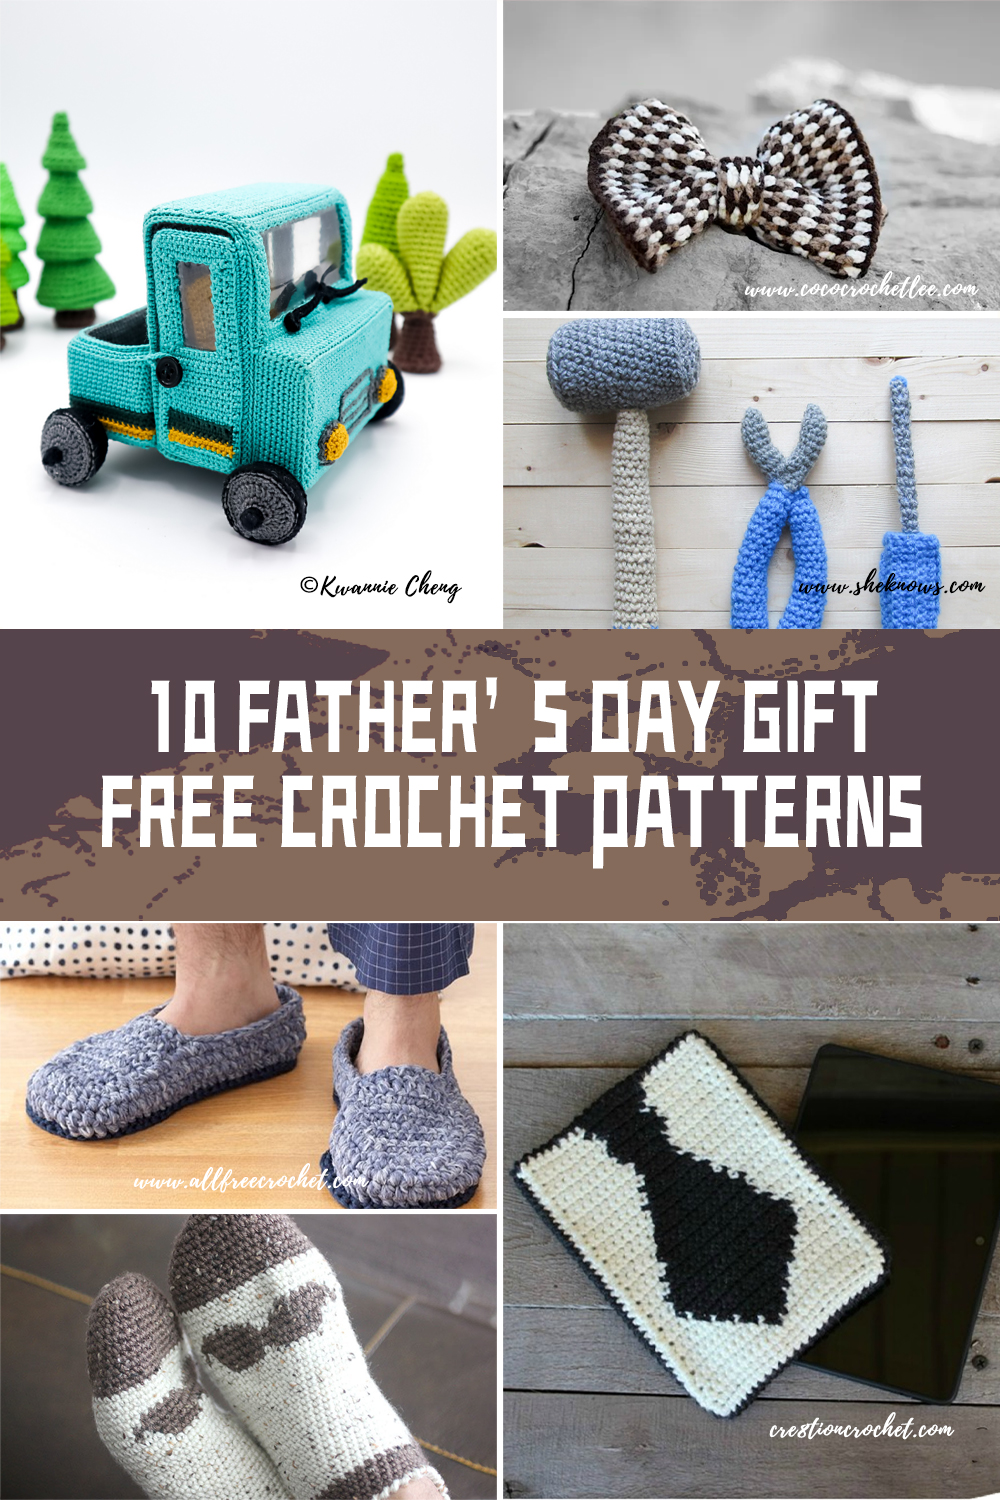 10 Crochet Father’s Day Gift FREE Patterns